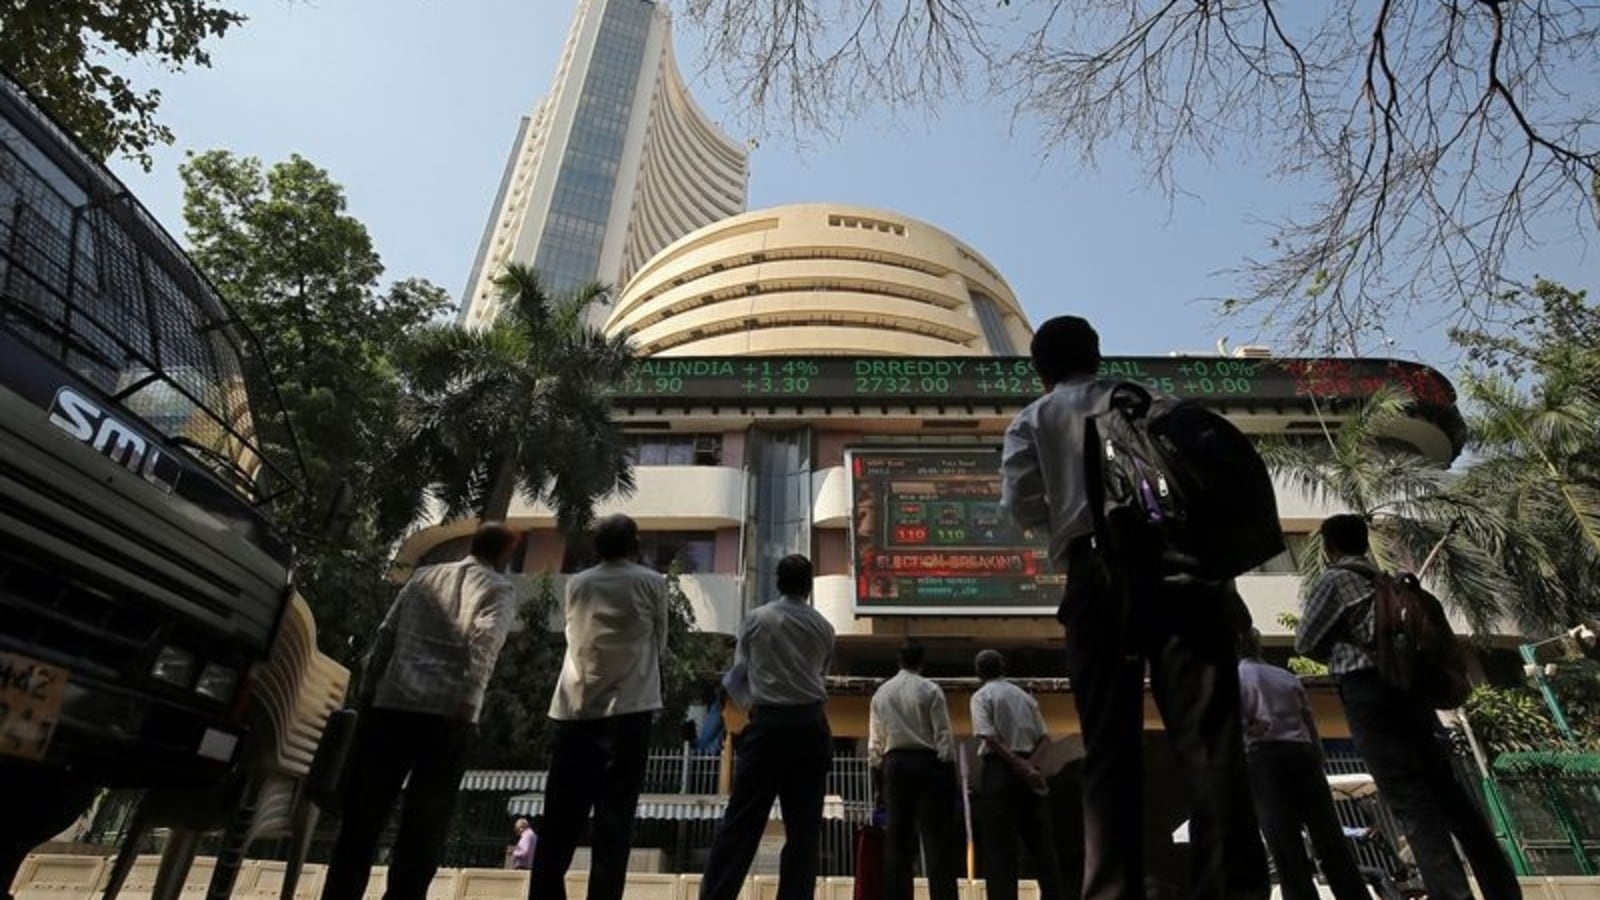 Sensex surges 590 points on firm global cues; IT stocks shine